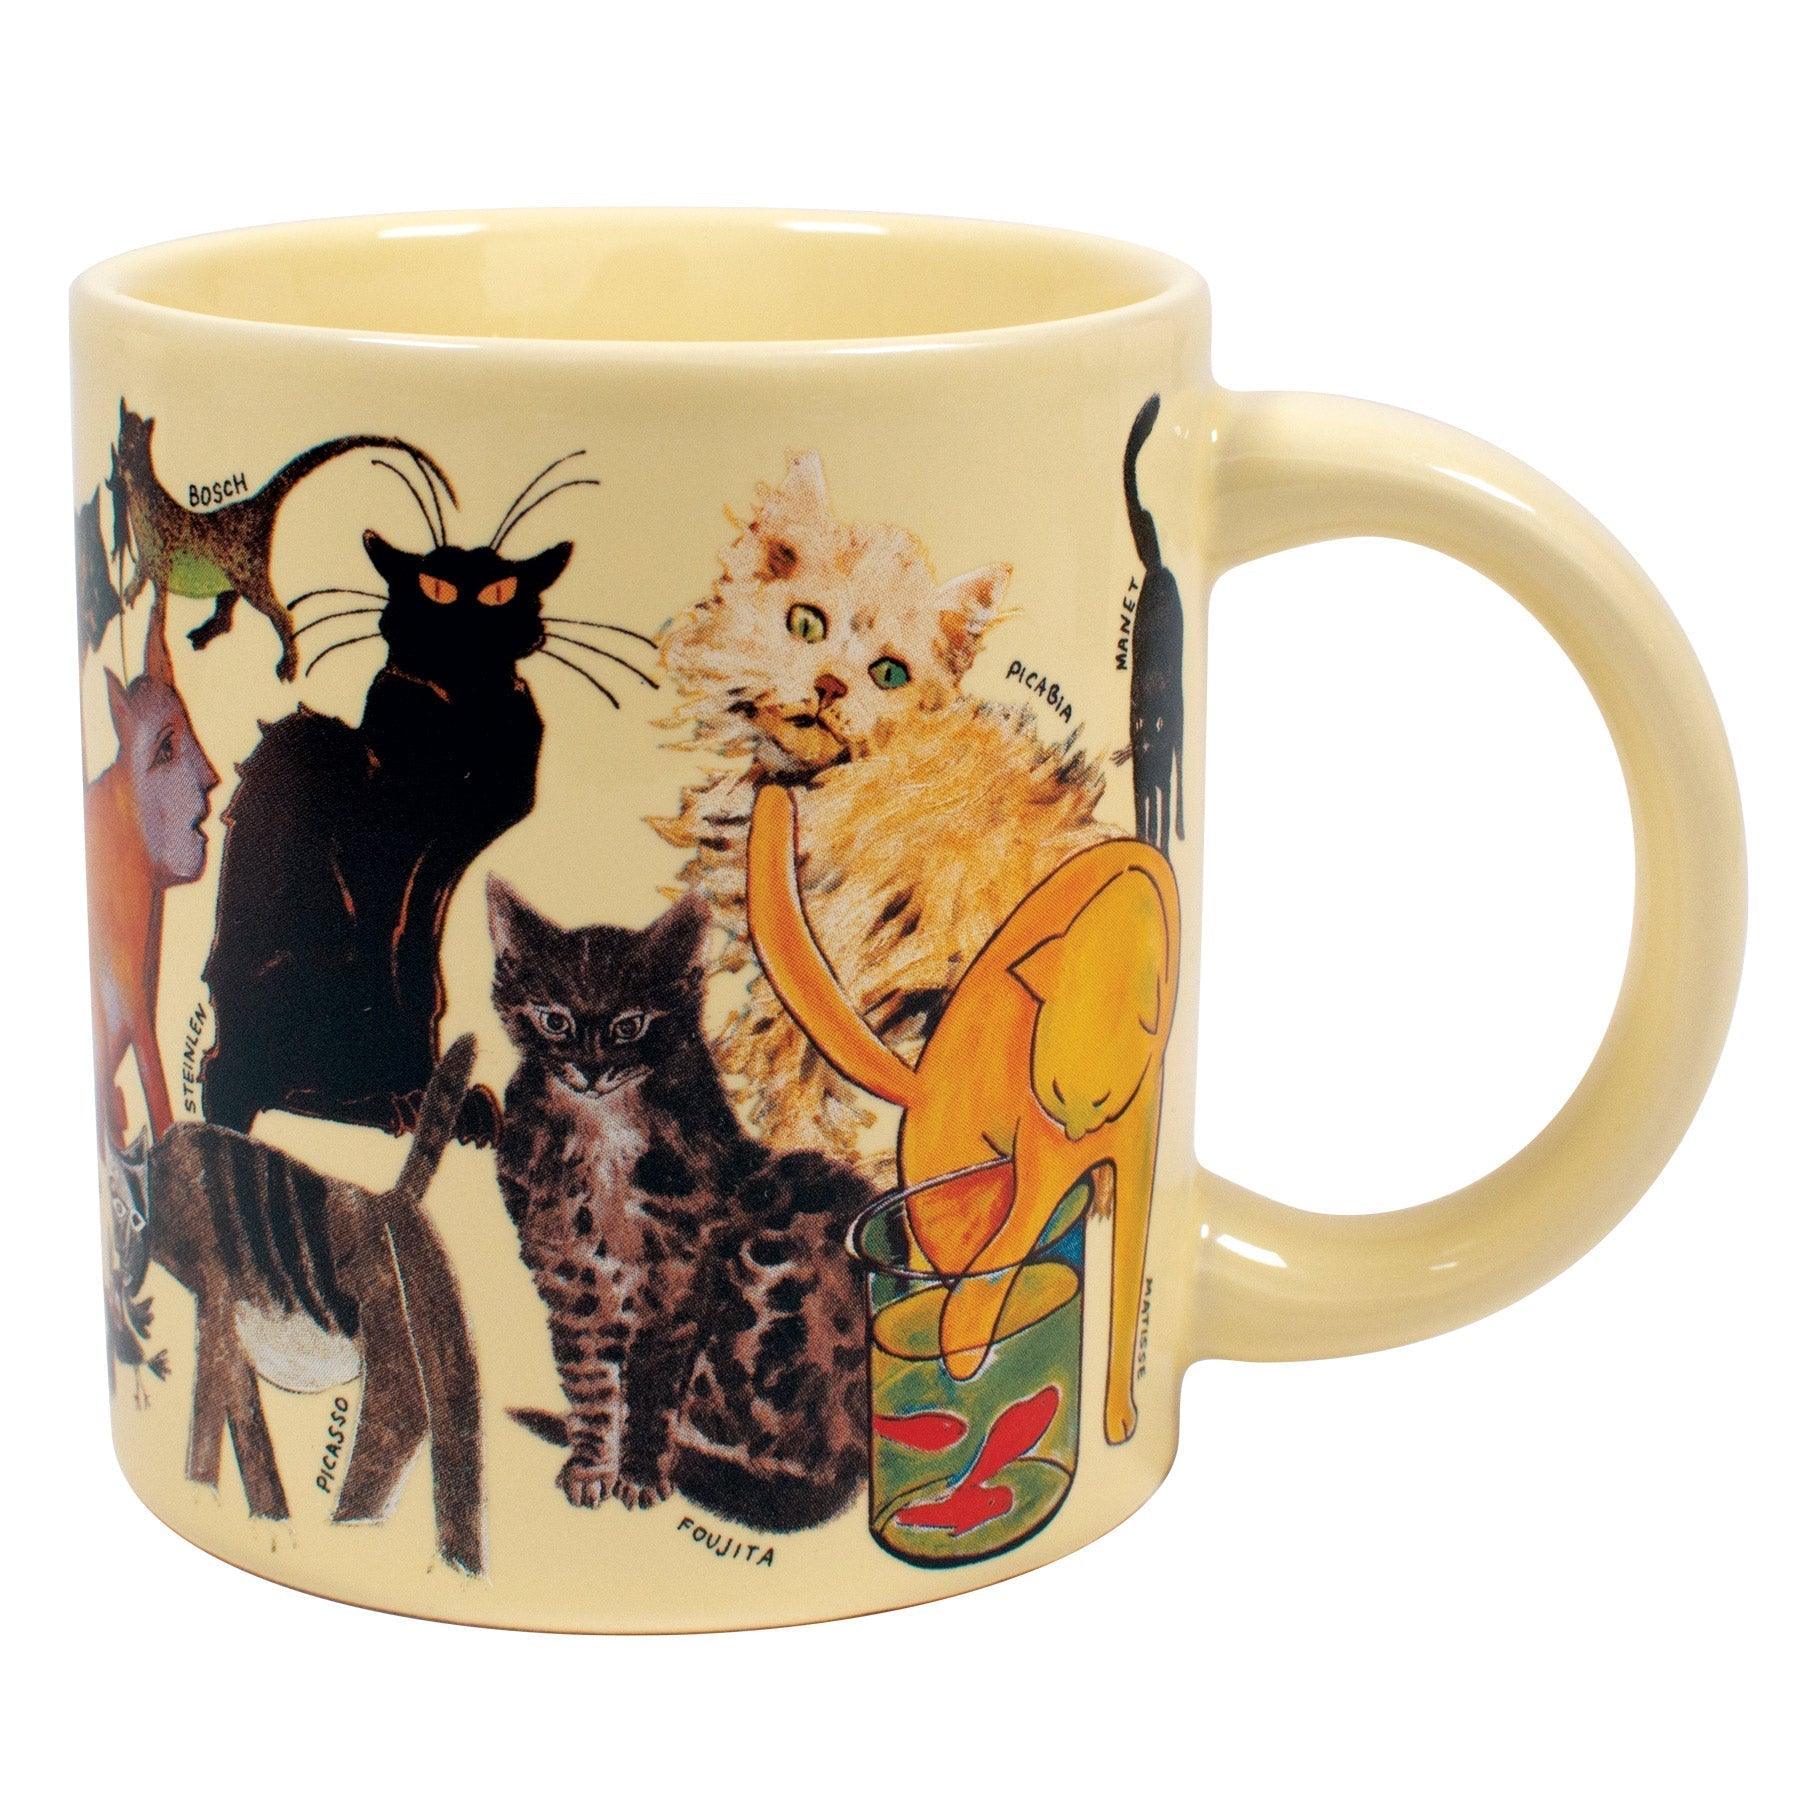 Product photo of Cats of Classical Art Mug, a novelty gift manufactured by The Unemployed Philosophers Guild.